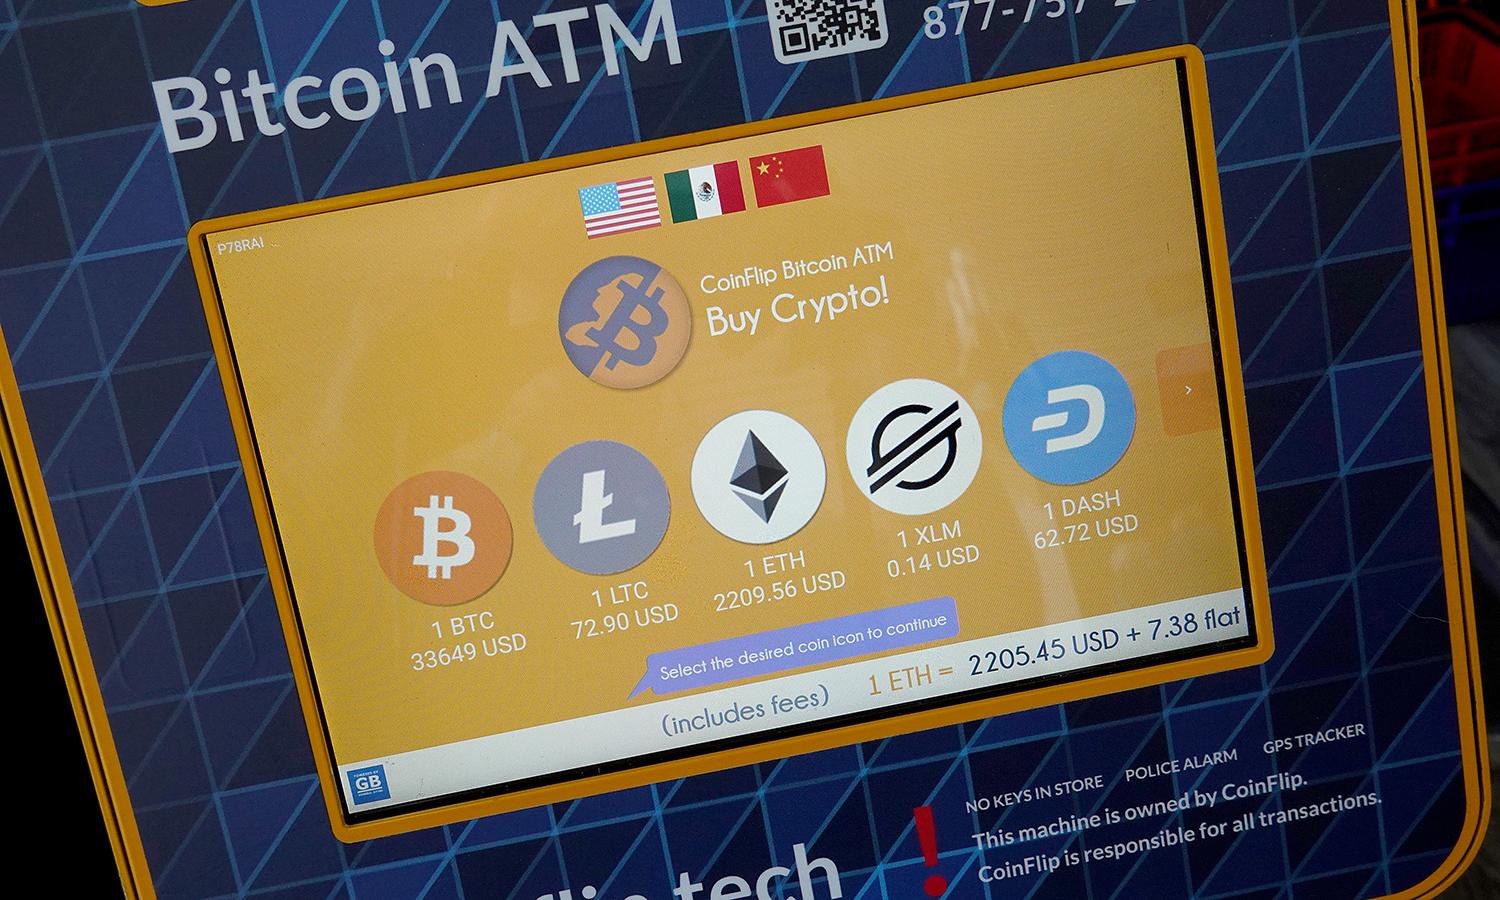 The screen of a Bitcoin ATM is seen.